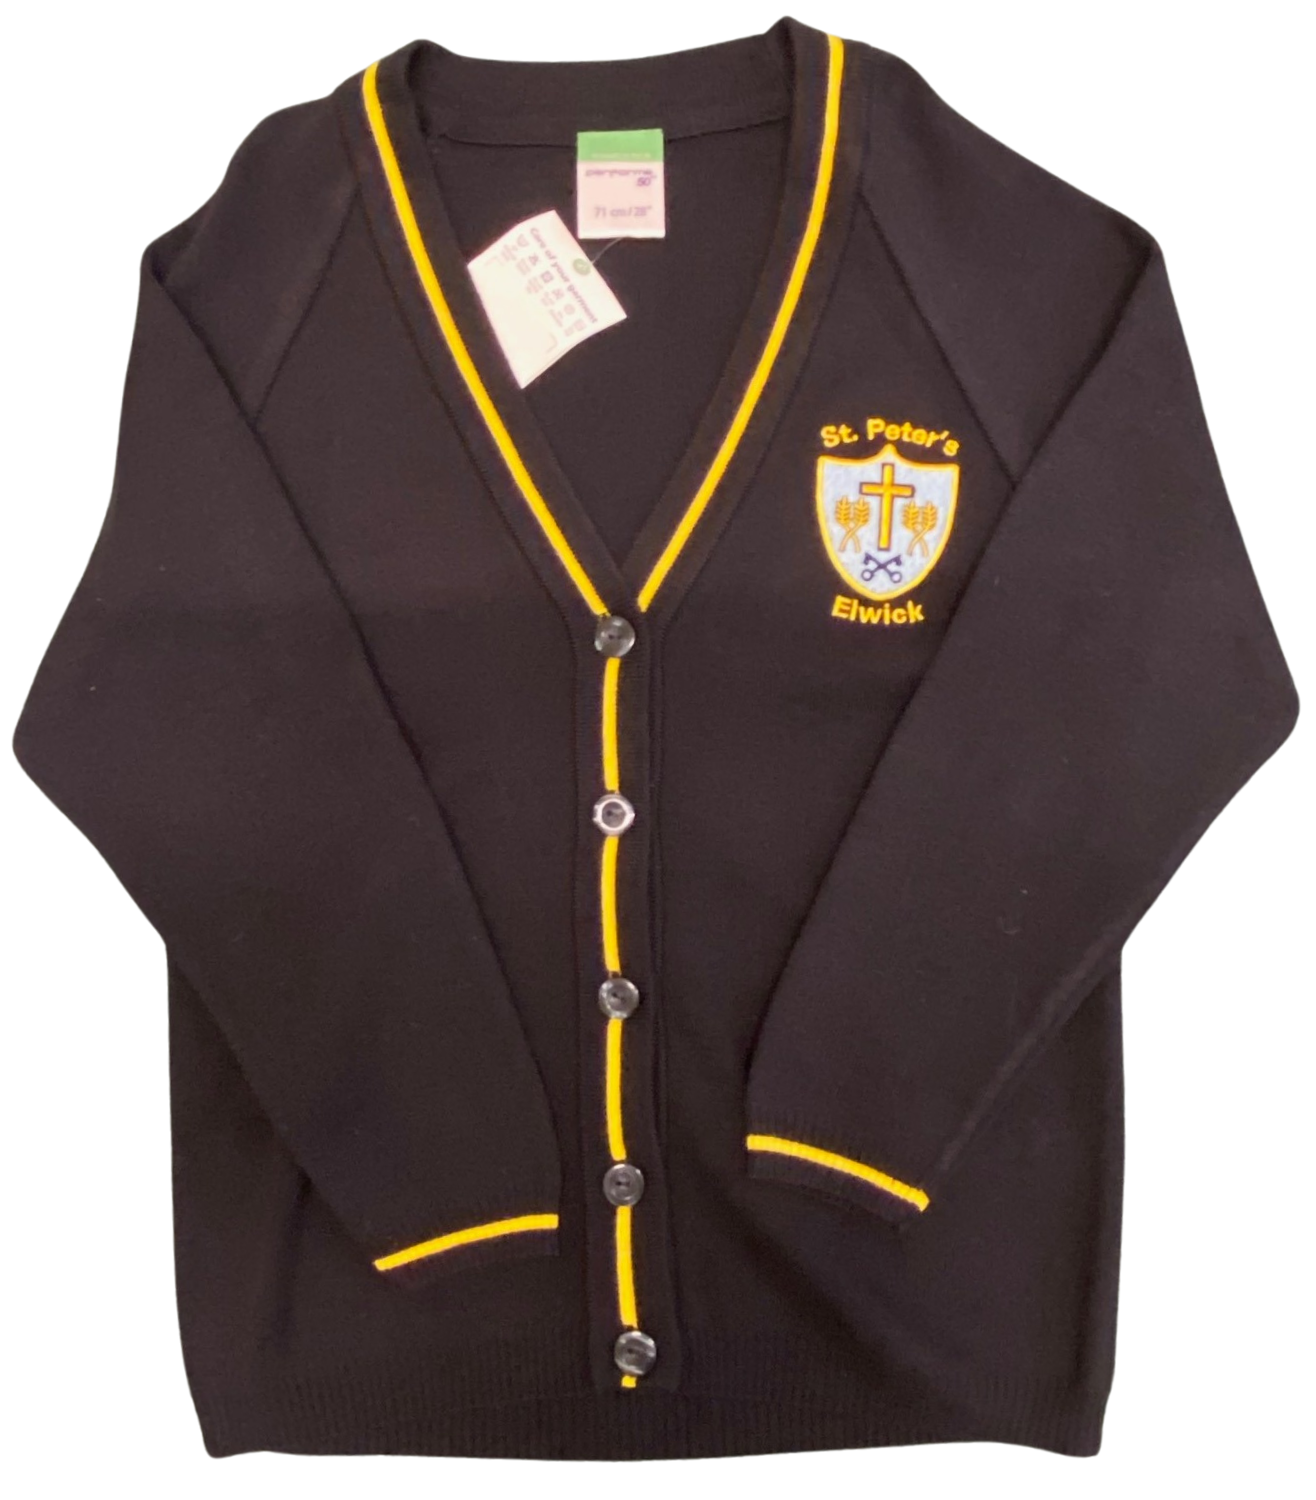 St. Peter's Elwick Navy And Yellow 50/50 Cardigan